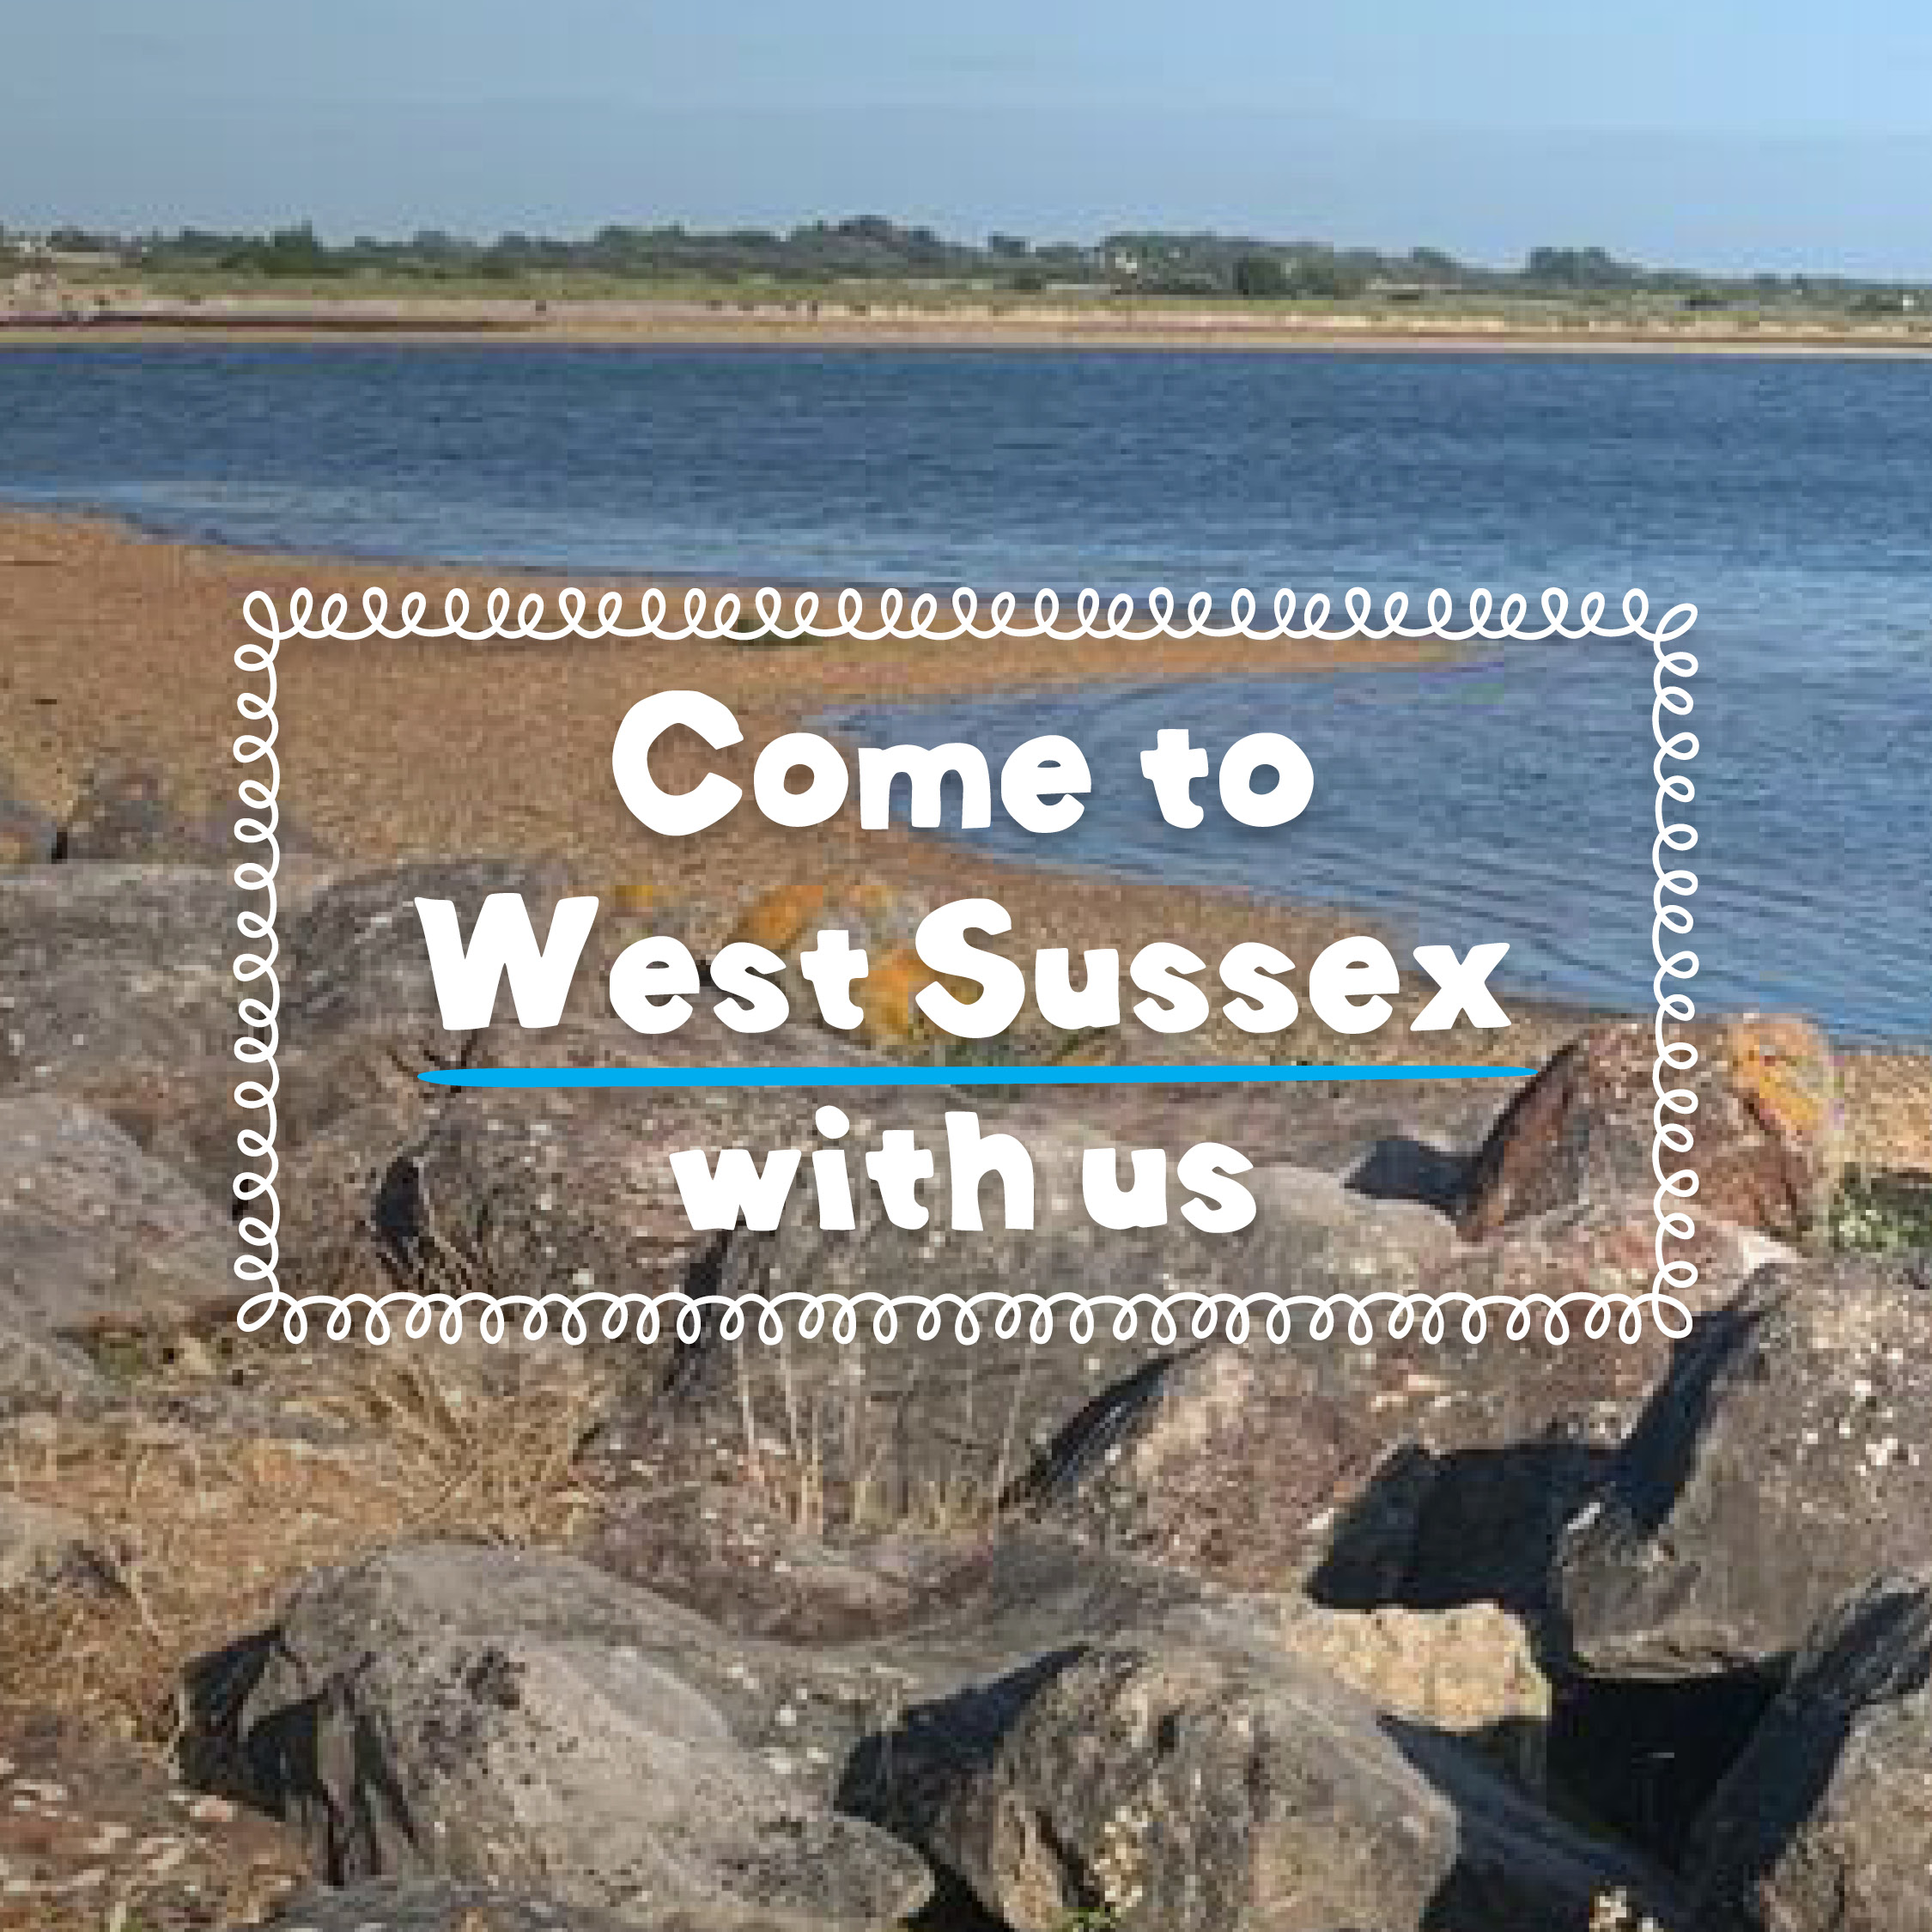 Spend a day in Sussex with us!